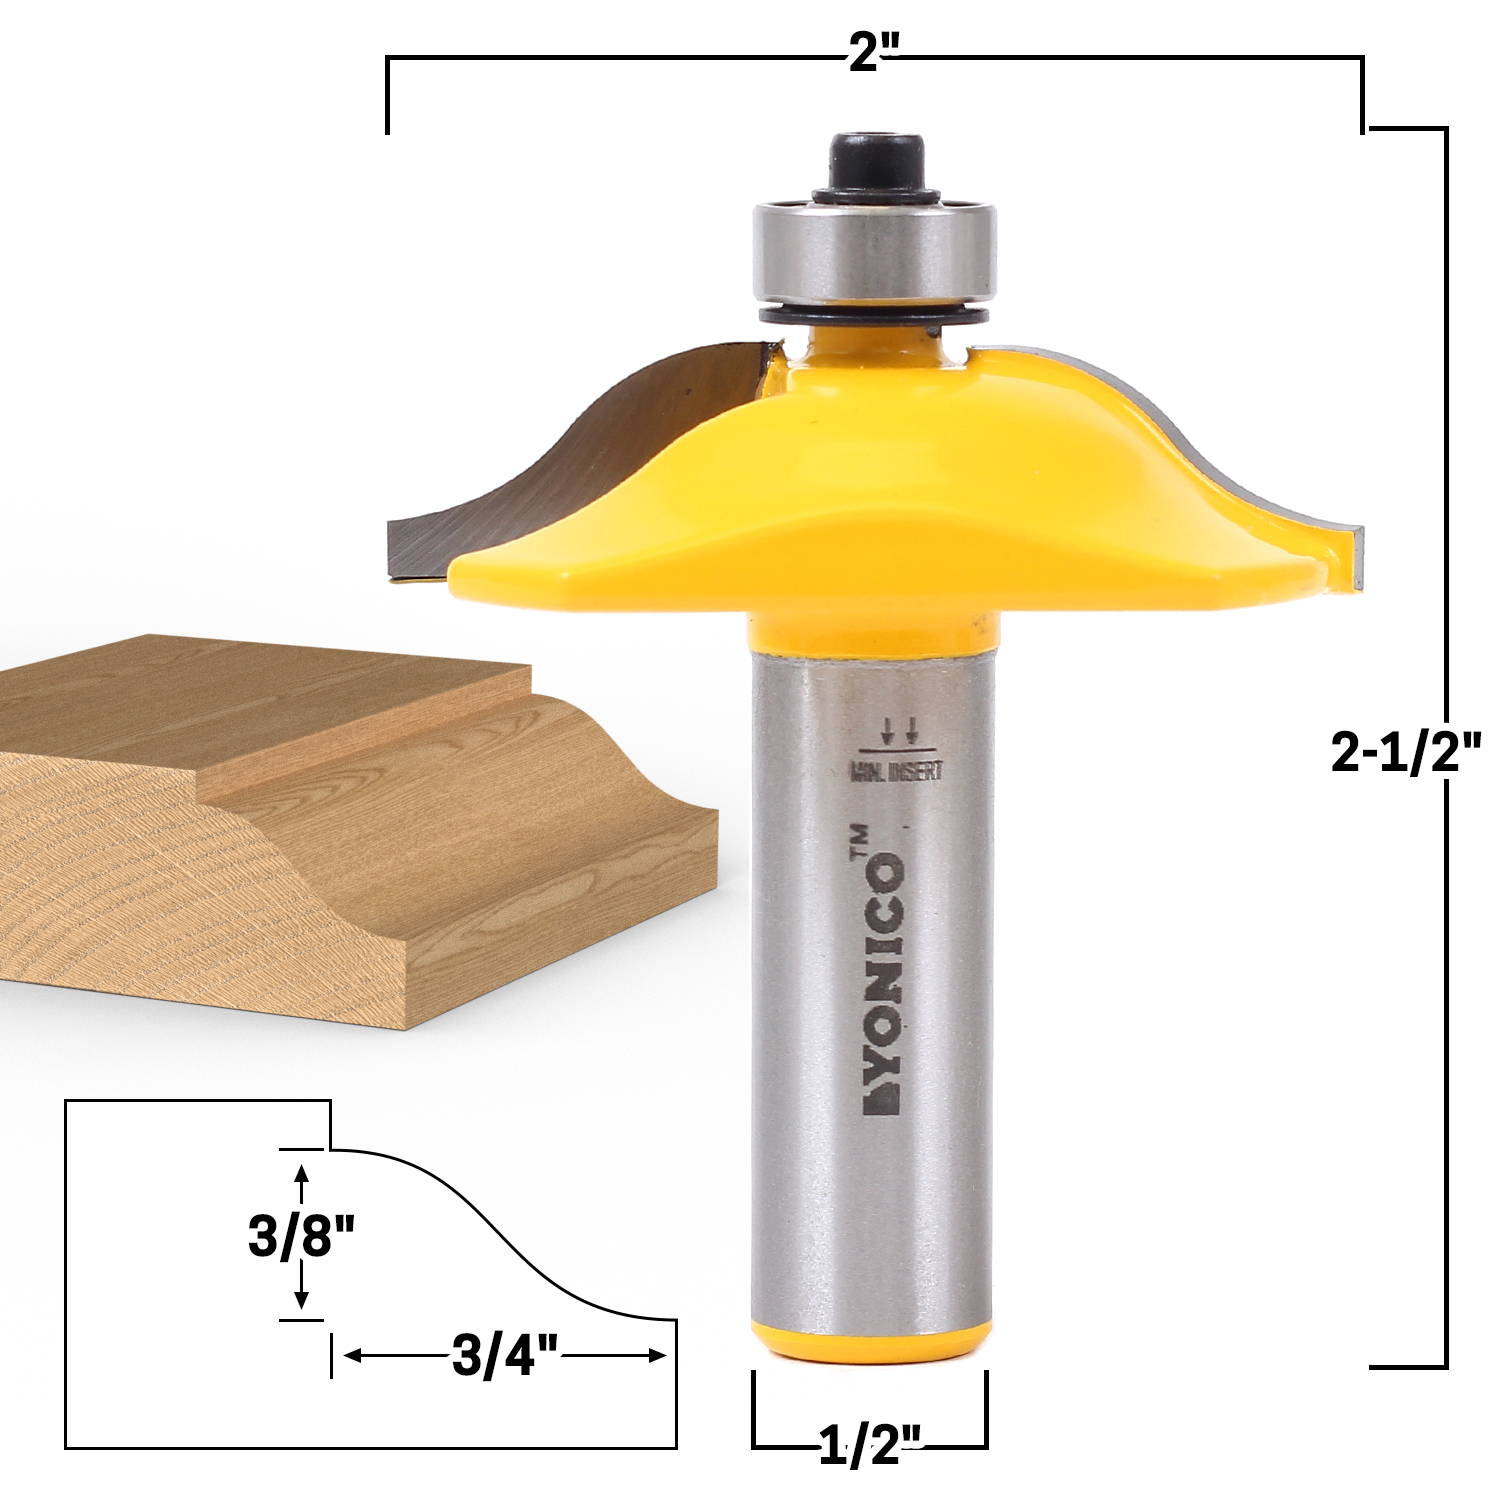 Yonico 12139 Brick Mold and Exterior Casing Router Bit 1/2-Inch Shank